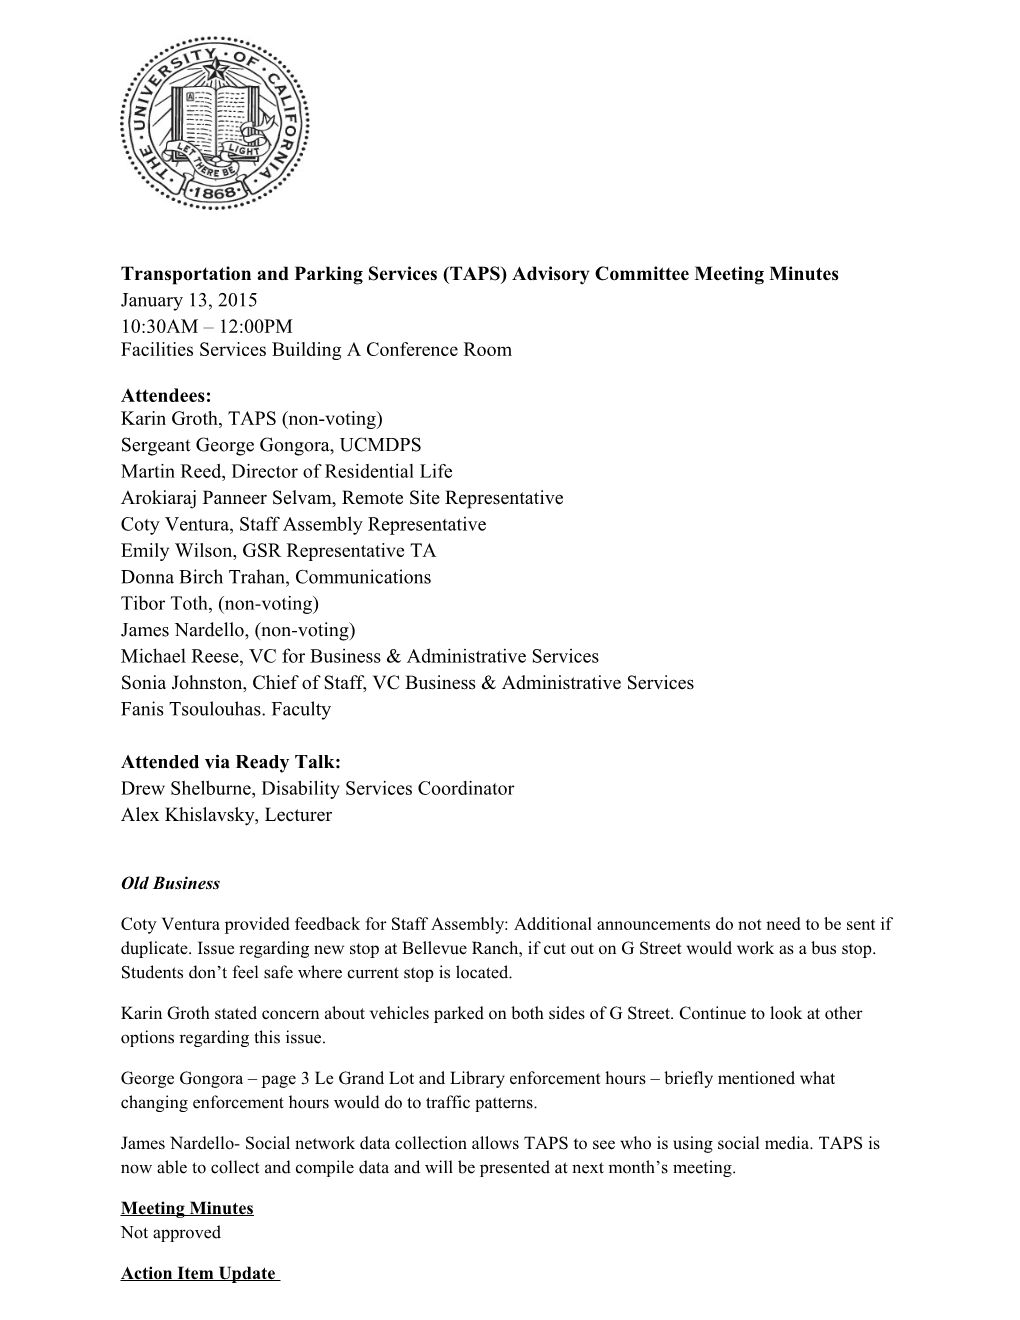 Transportation and Parking Services (TAPS) Advisory Committee Meeting Minutes